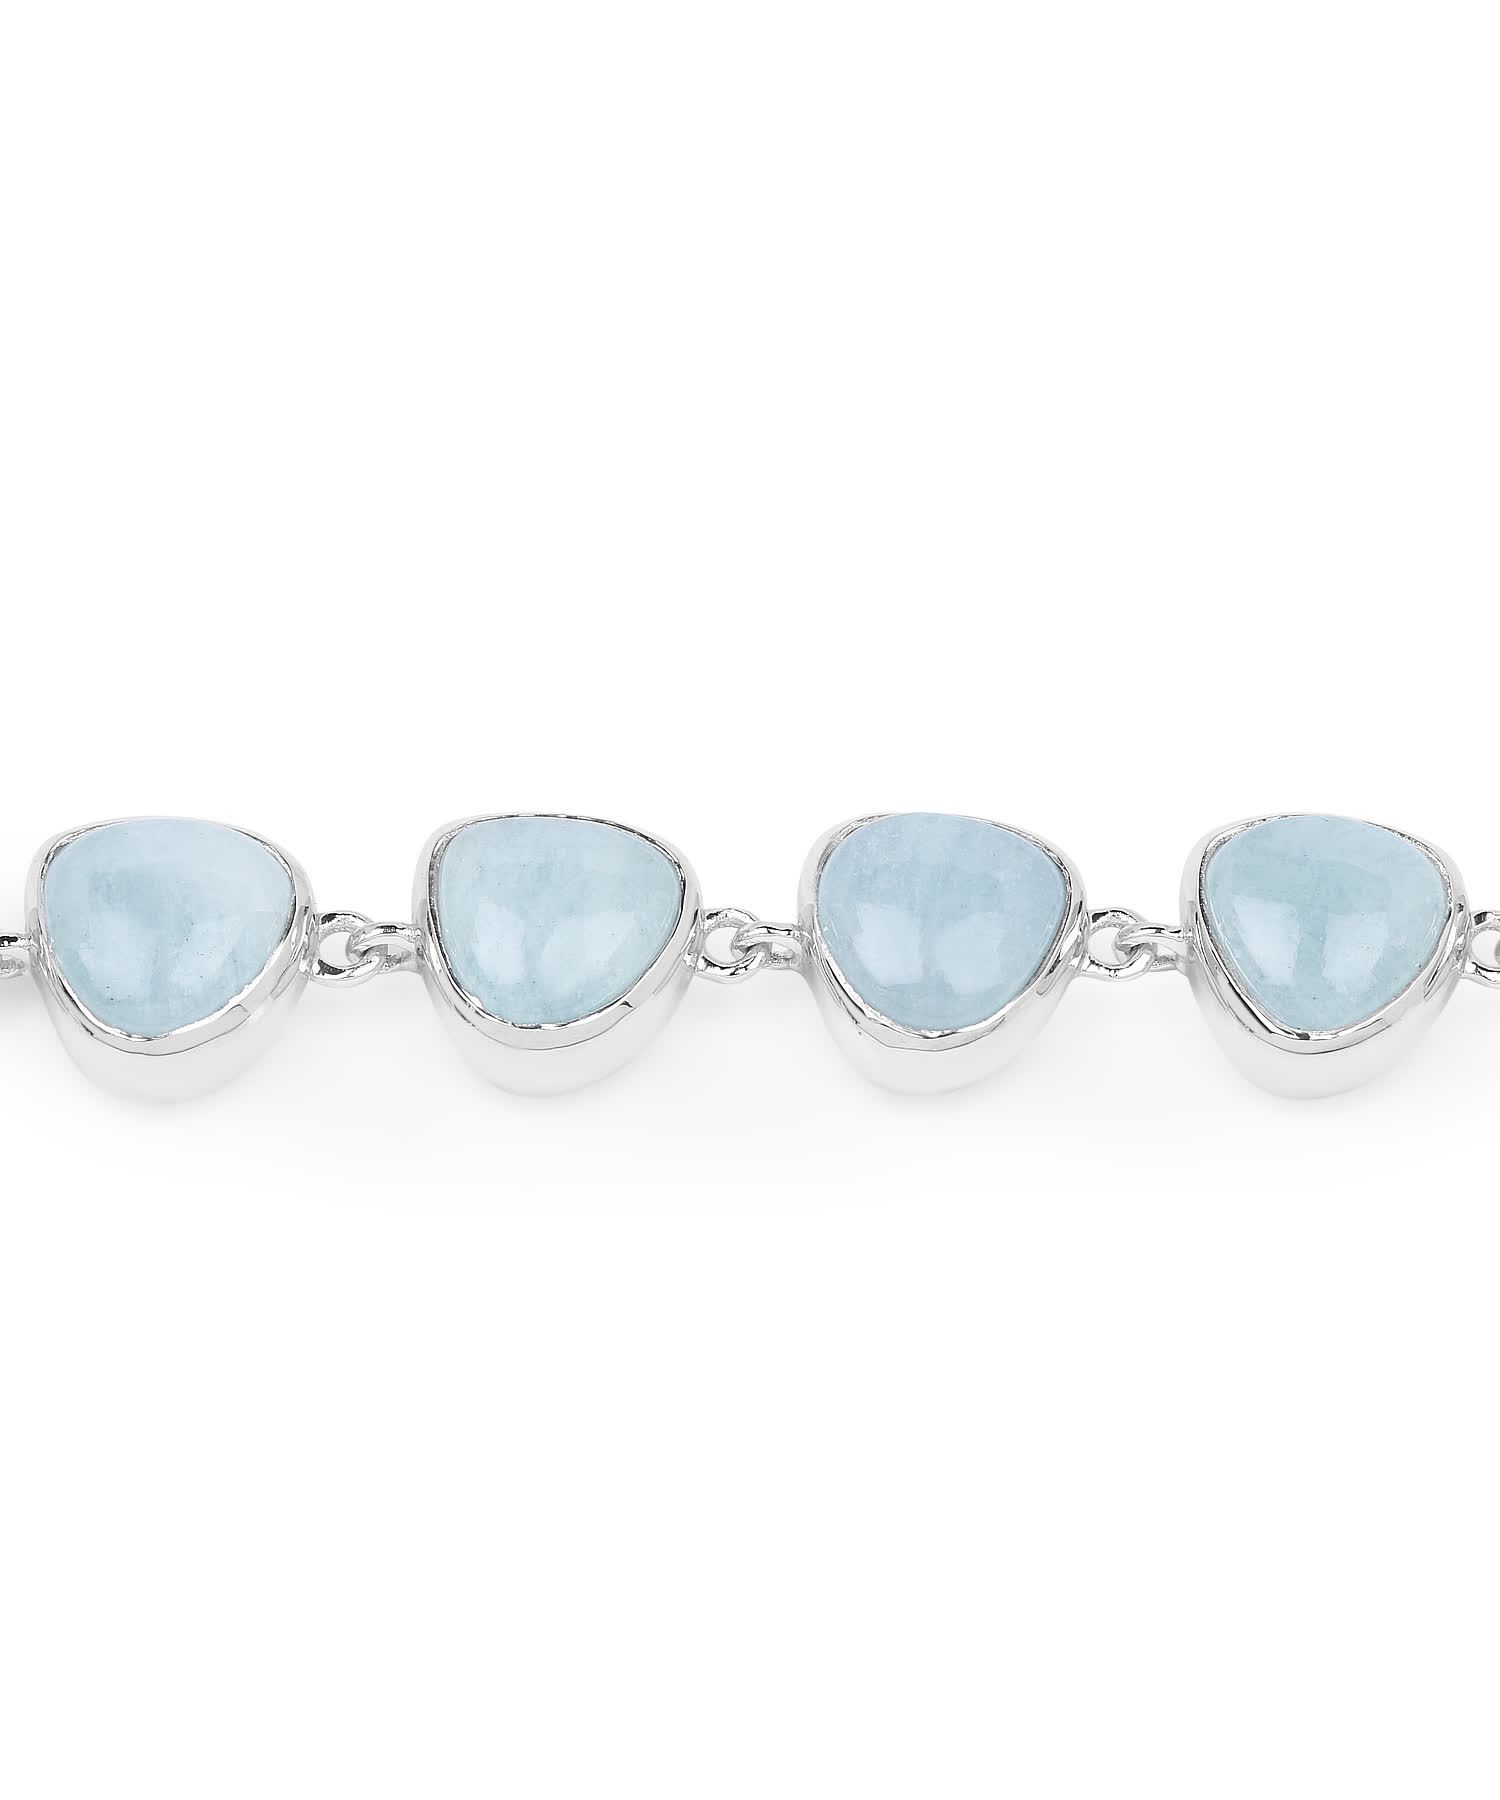 25.90ctw Natural Icy Sky Blue Aquamarine Rhodium Plated 925 Sterling Silver Link Bracelet View 3